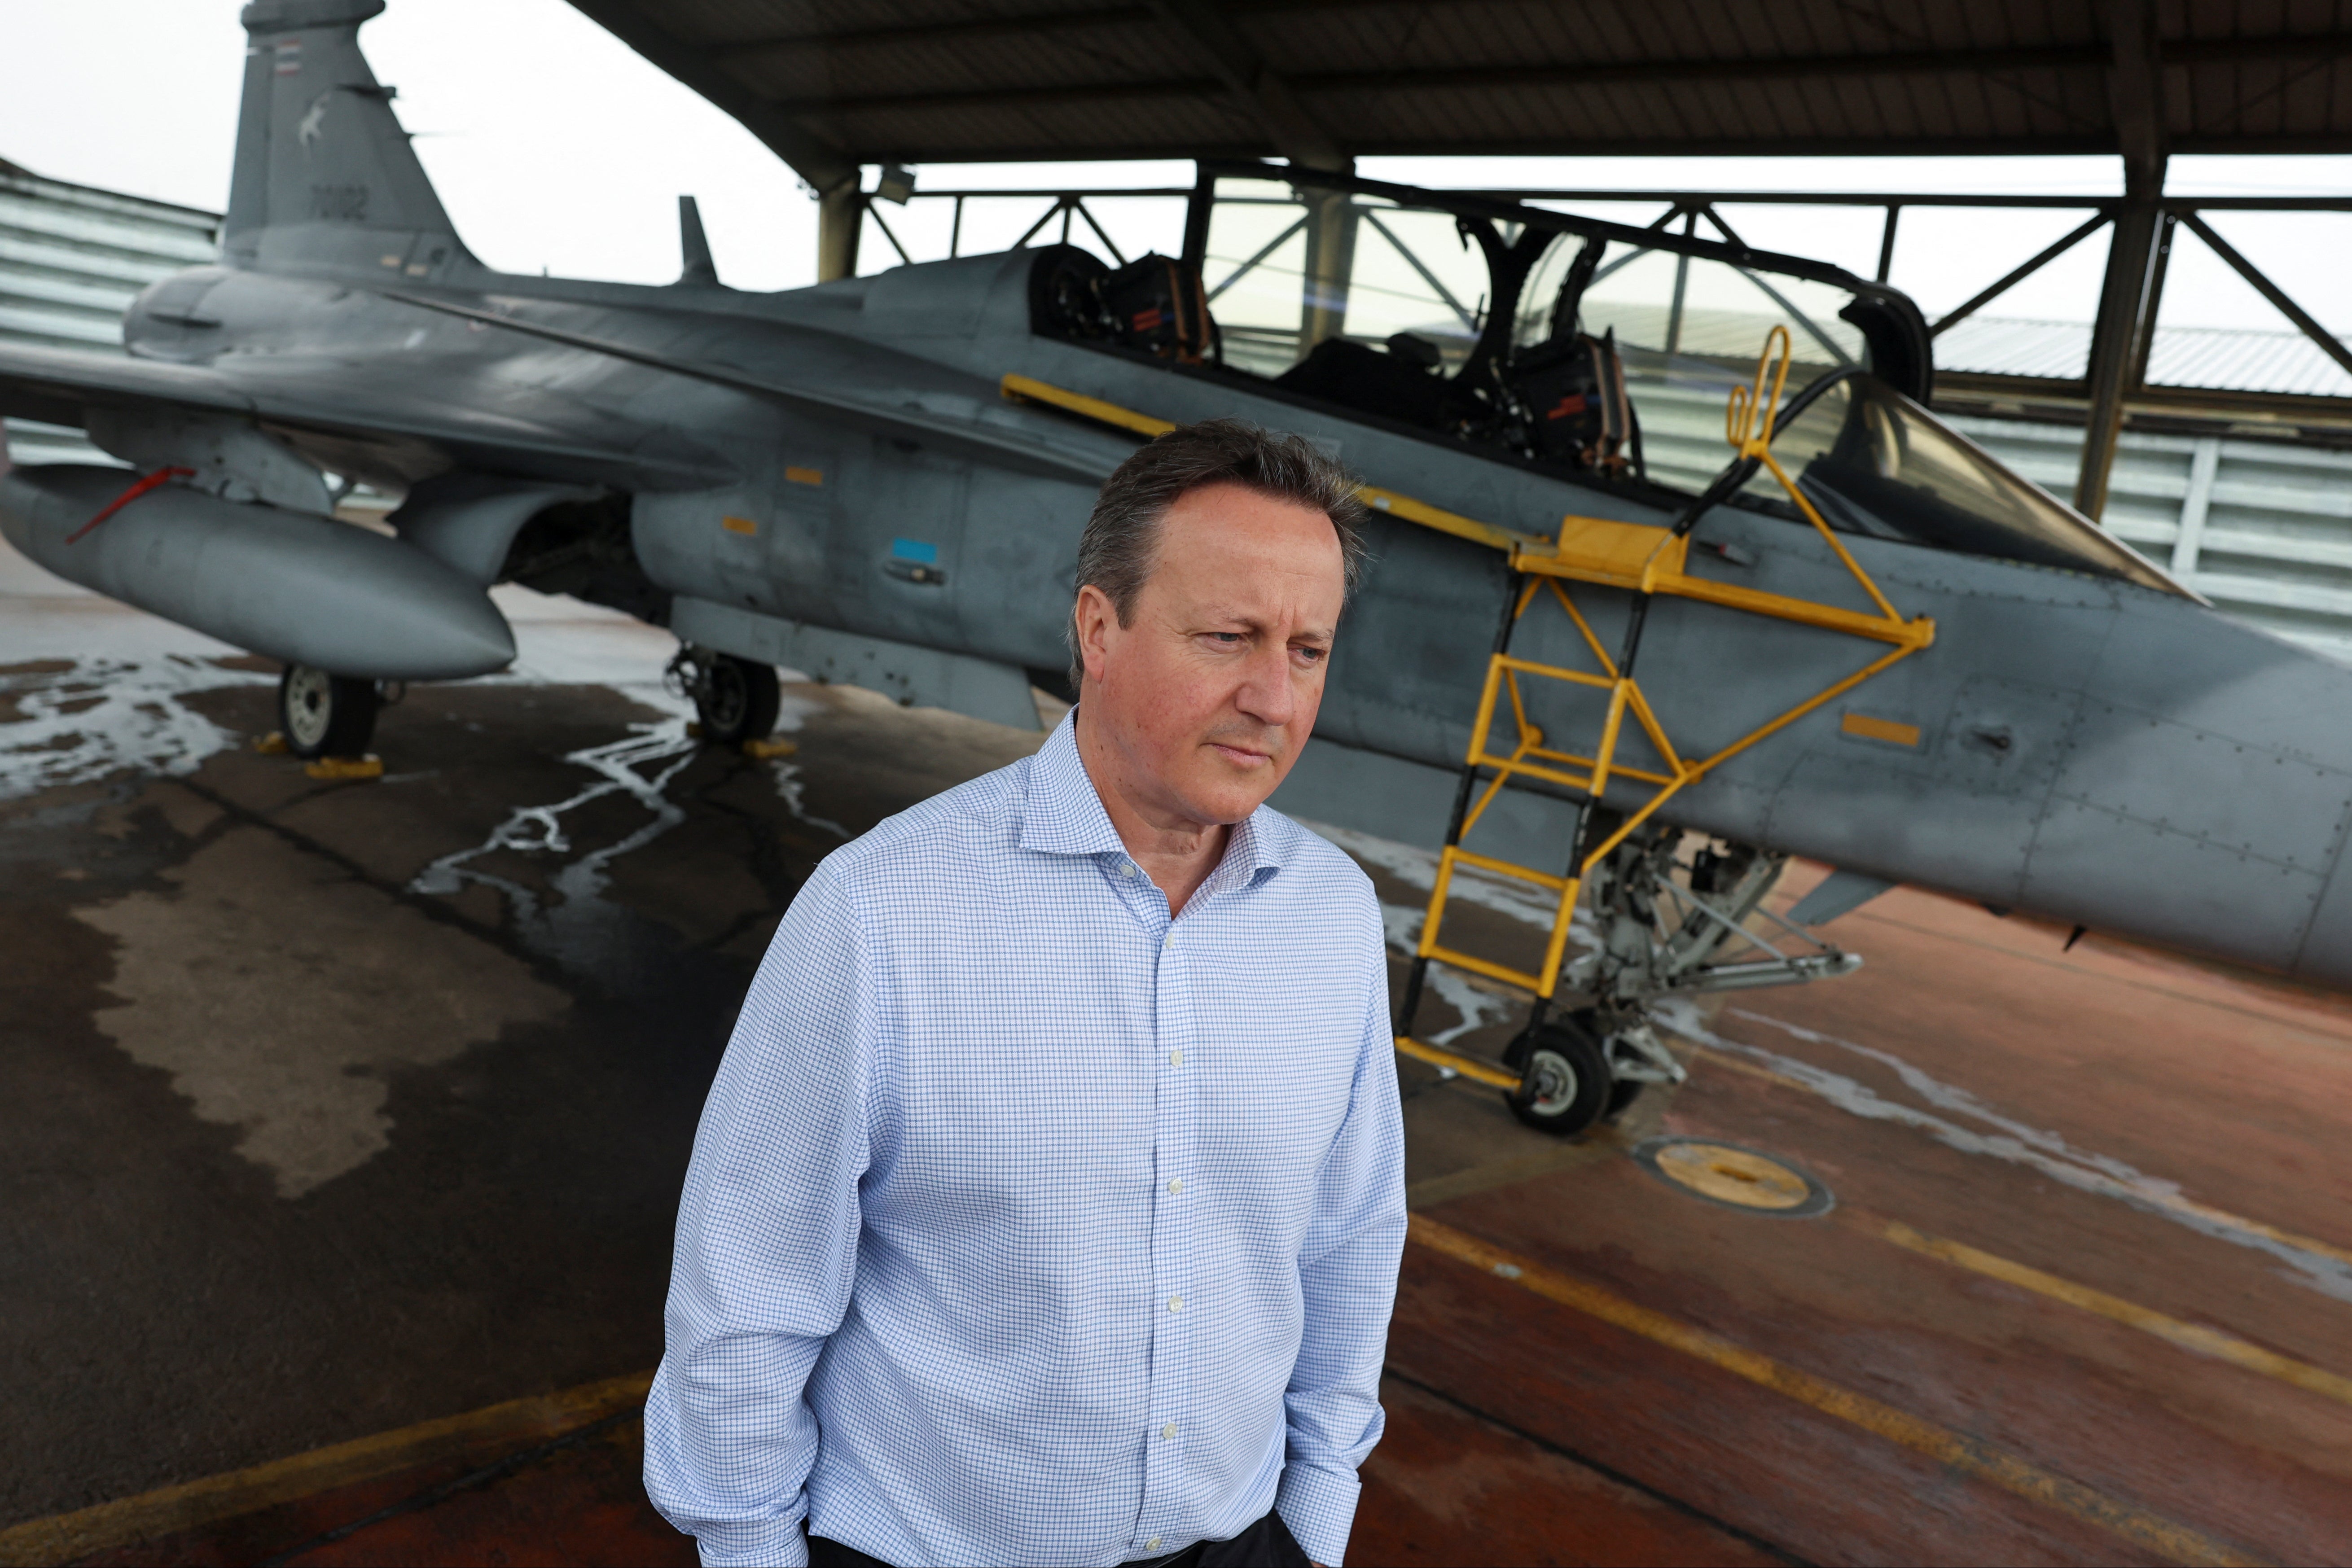 David Cameron spoke about the conflict during a visit to Thailand